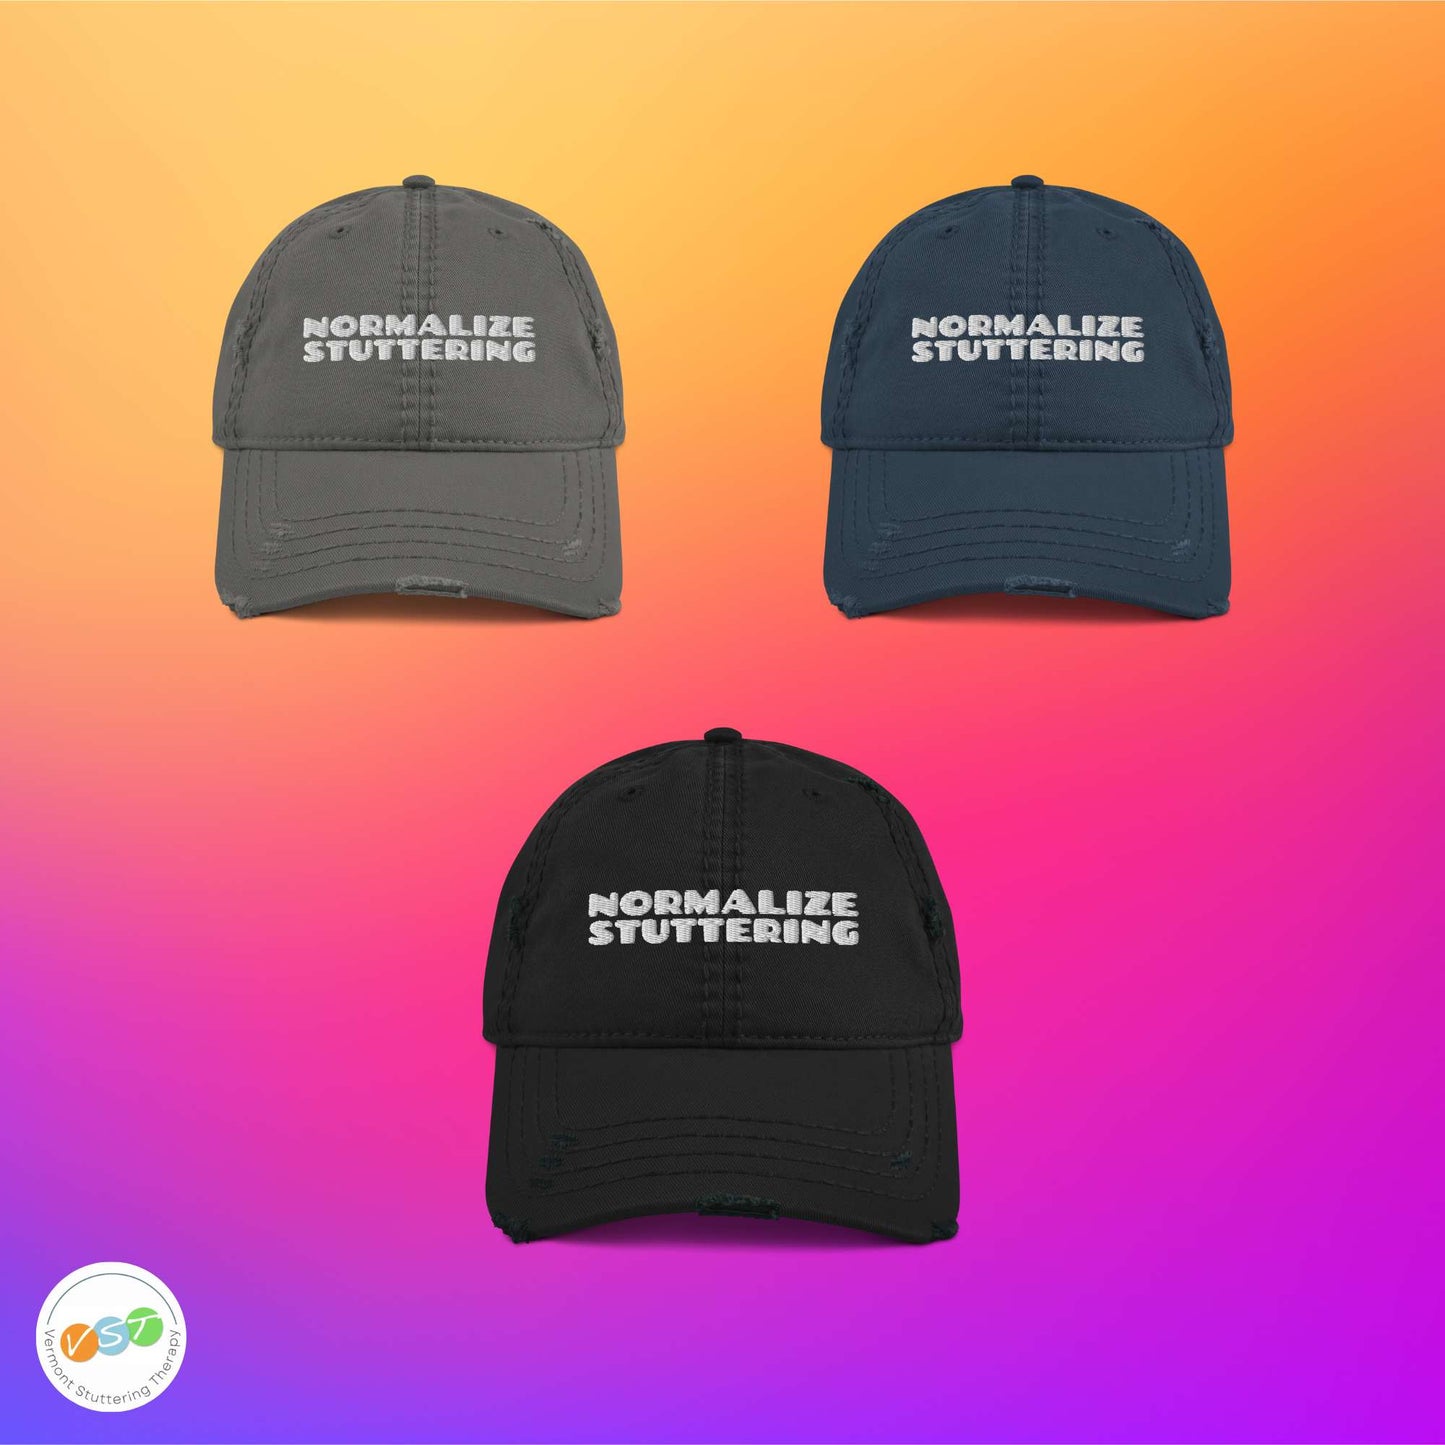 Normalize Stuttering Embroidered Dad Hat - Unisex